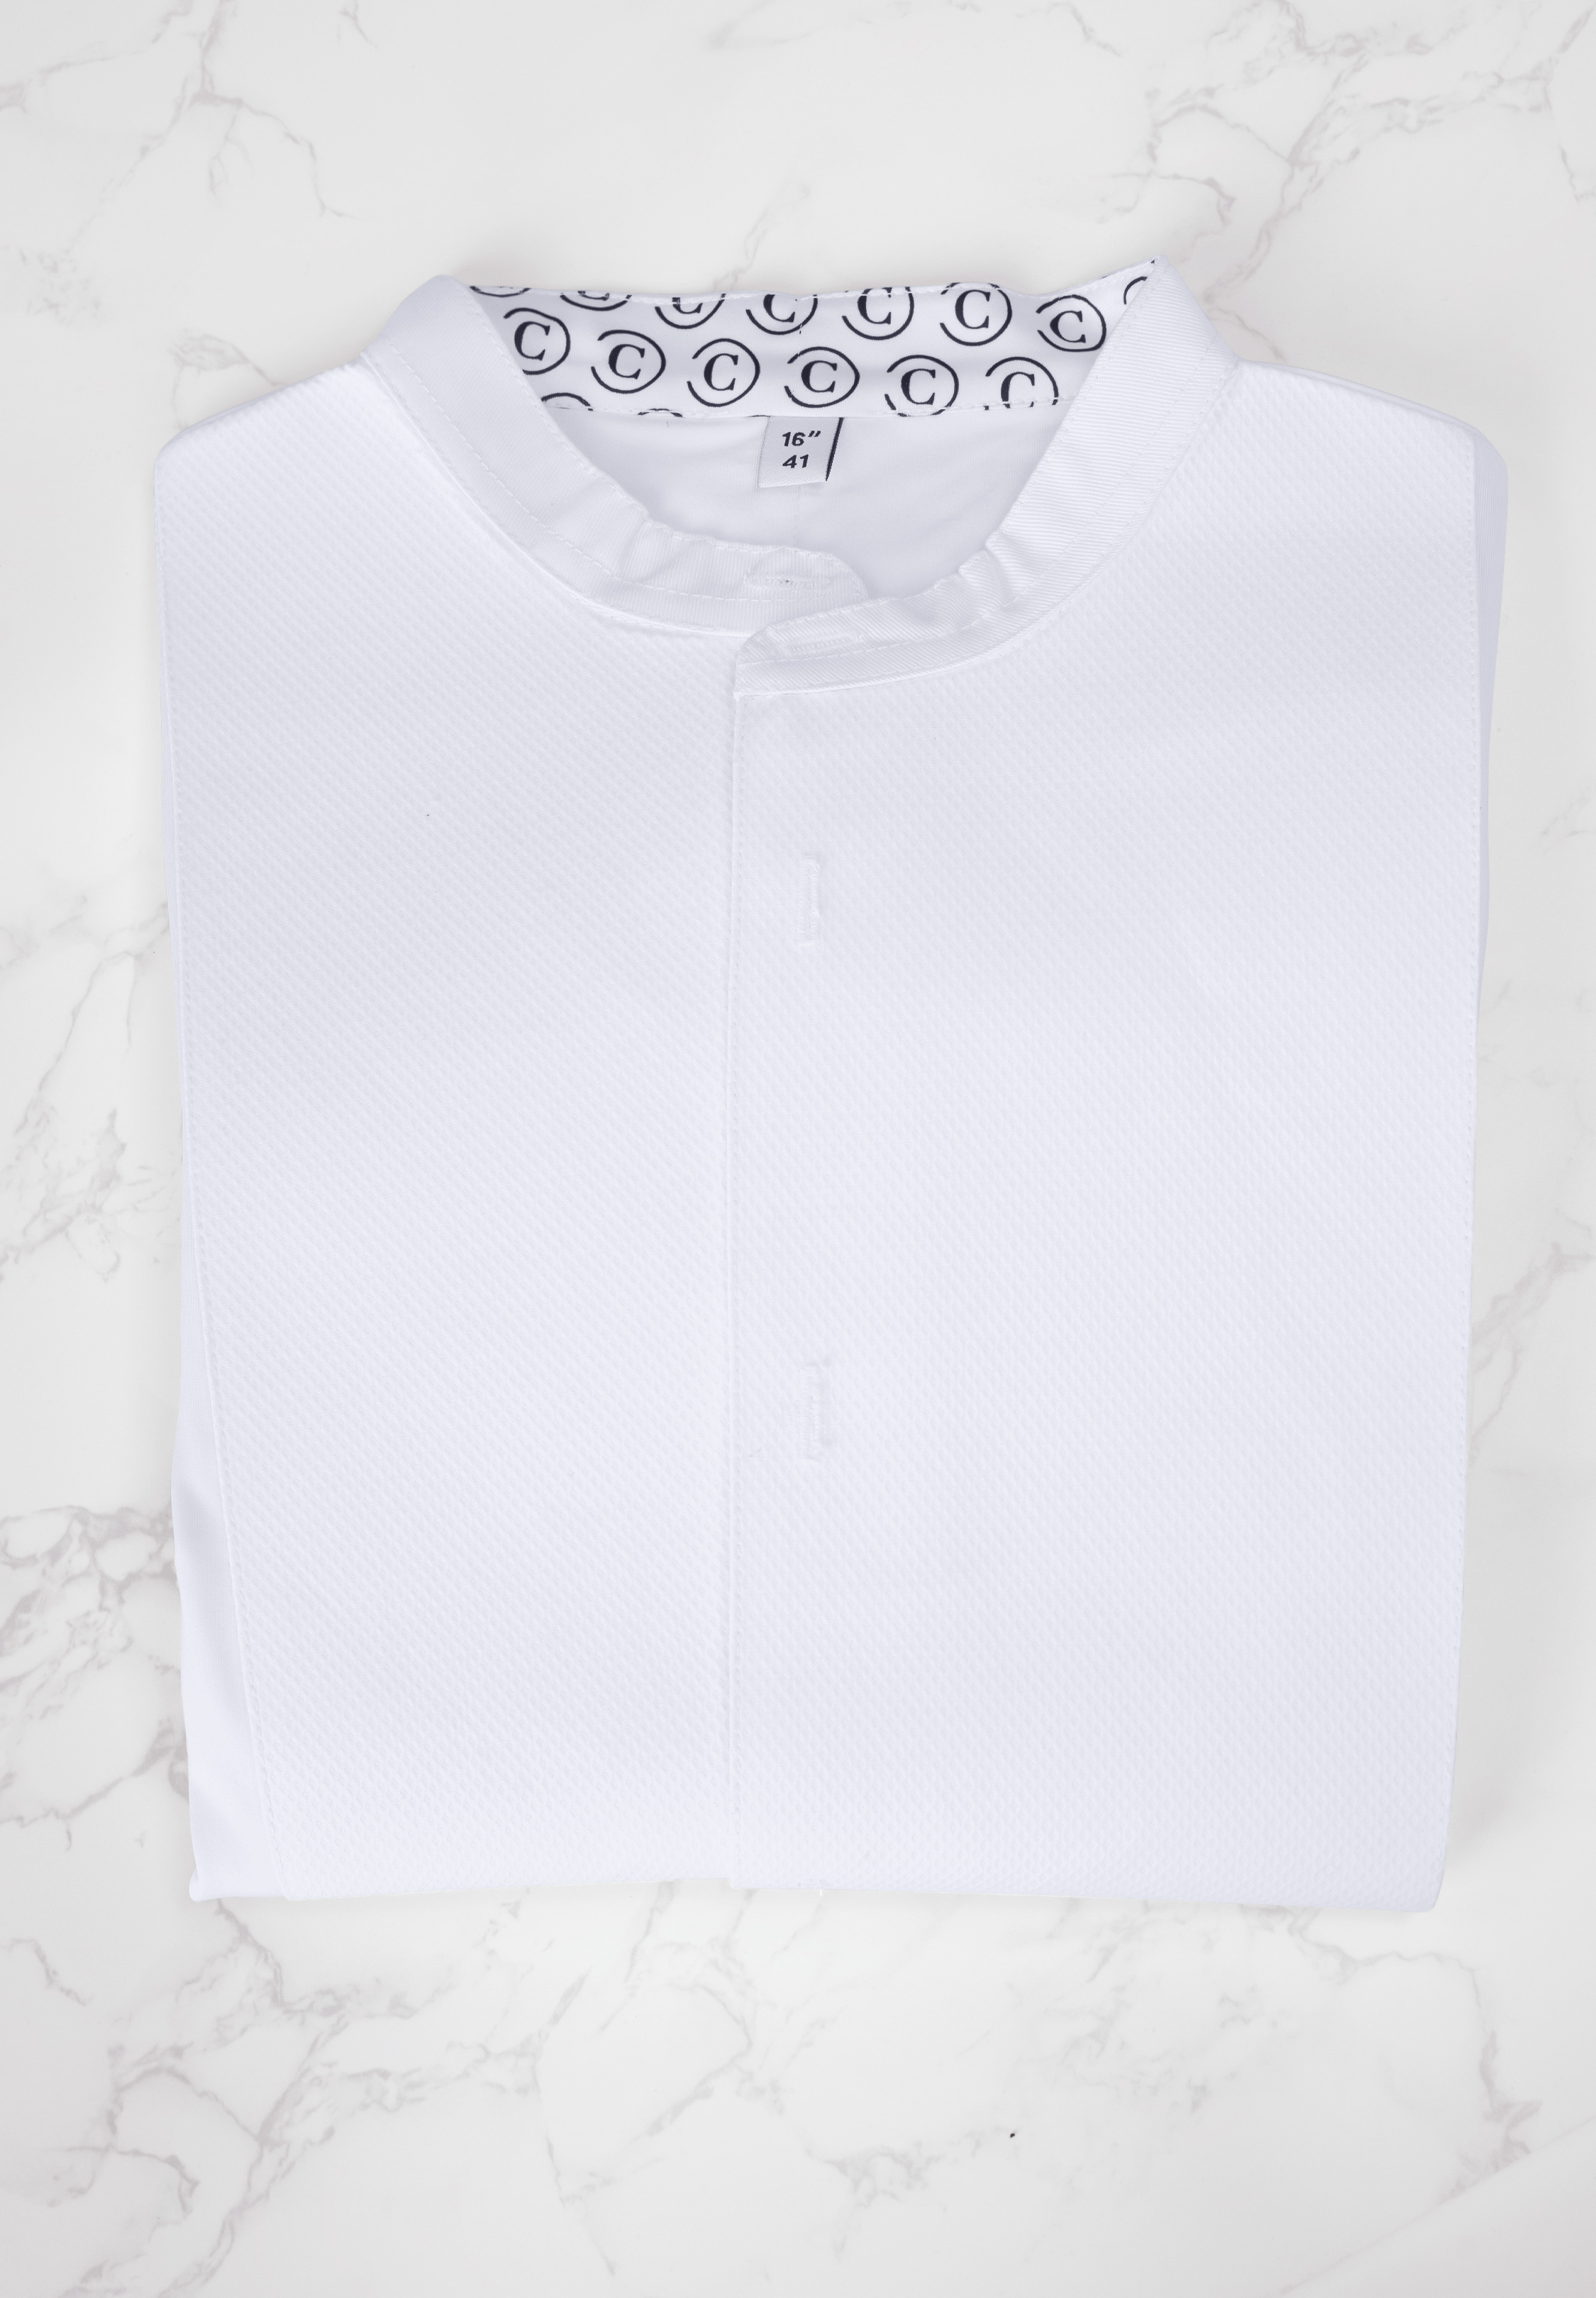 Chrisanne Clover Mens Competition Shirt